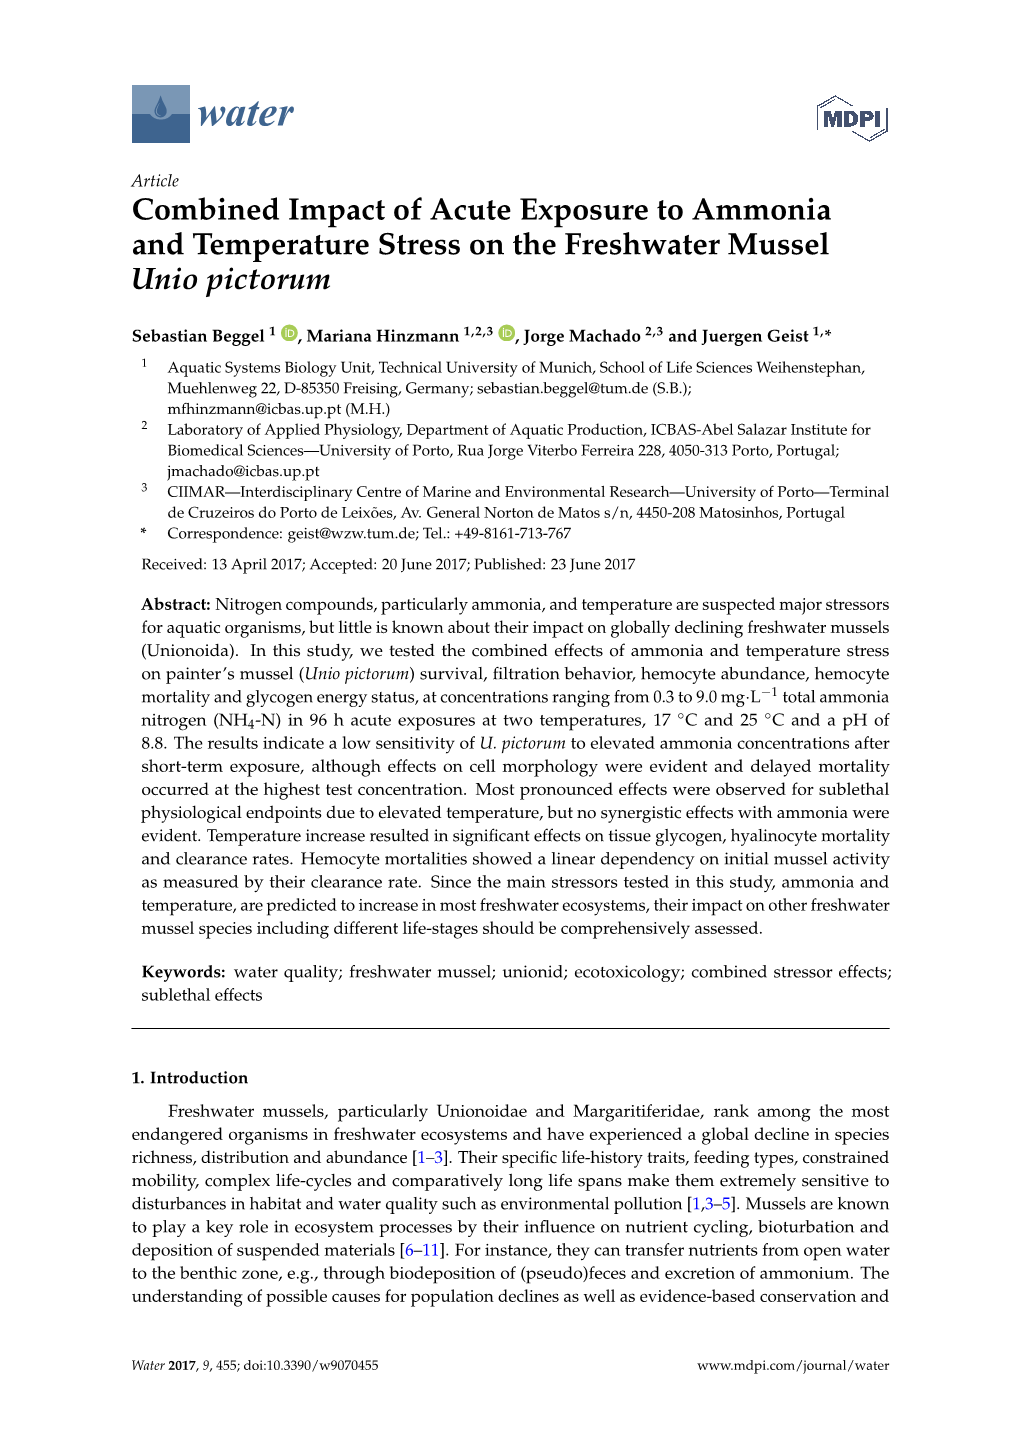 Combined Impact of Acute Exposure to Ammonia and Temperature Stress on the Freshwater Mussel Unio Pictorum